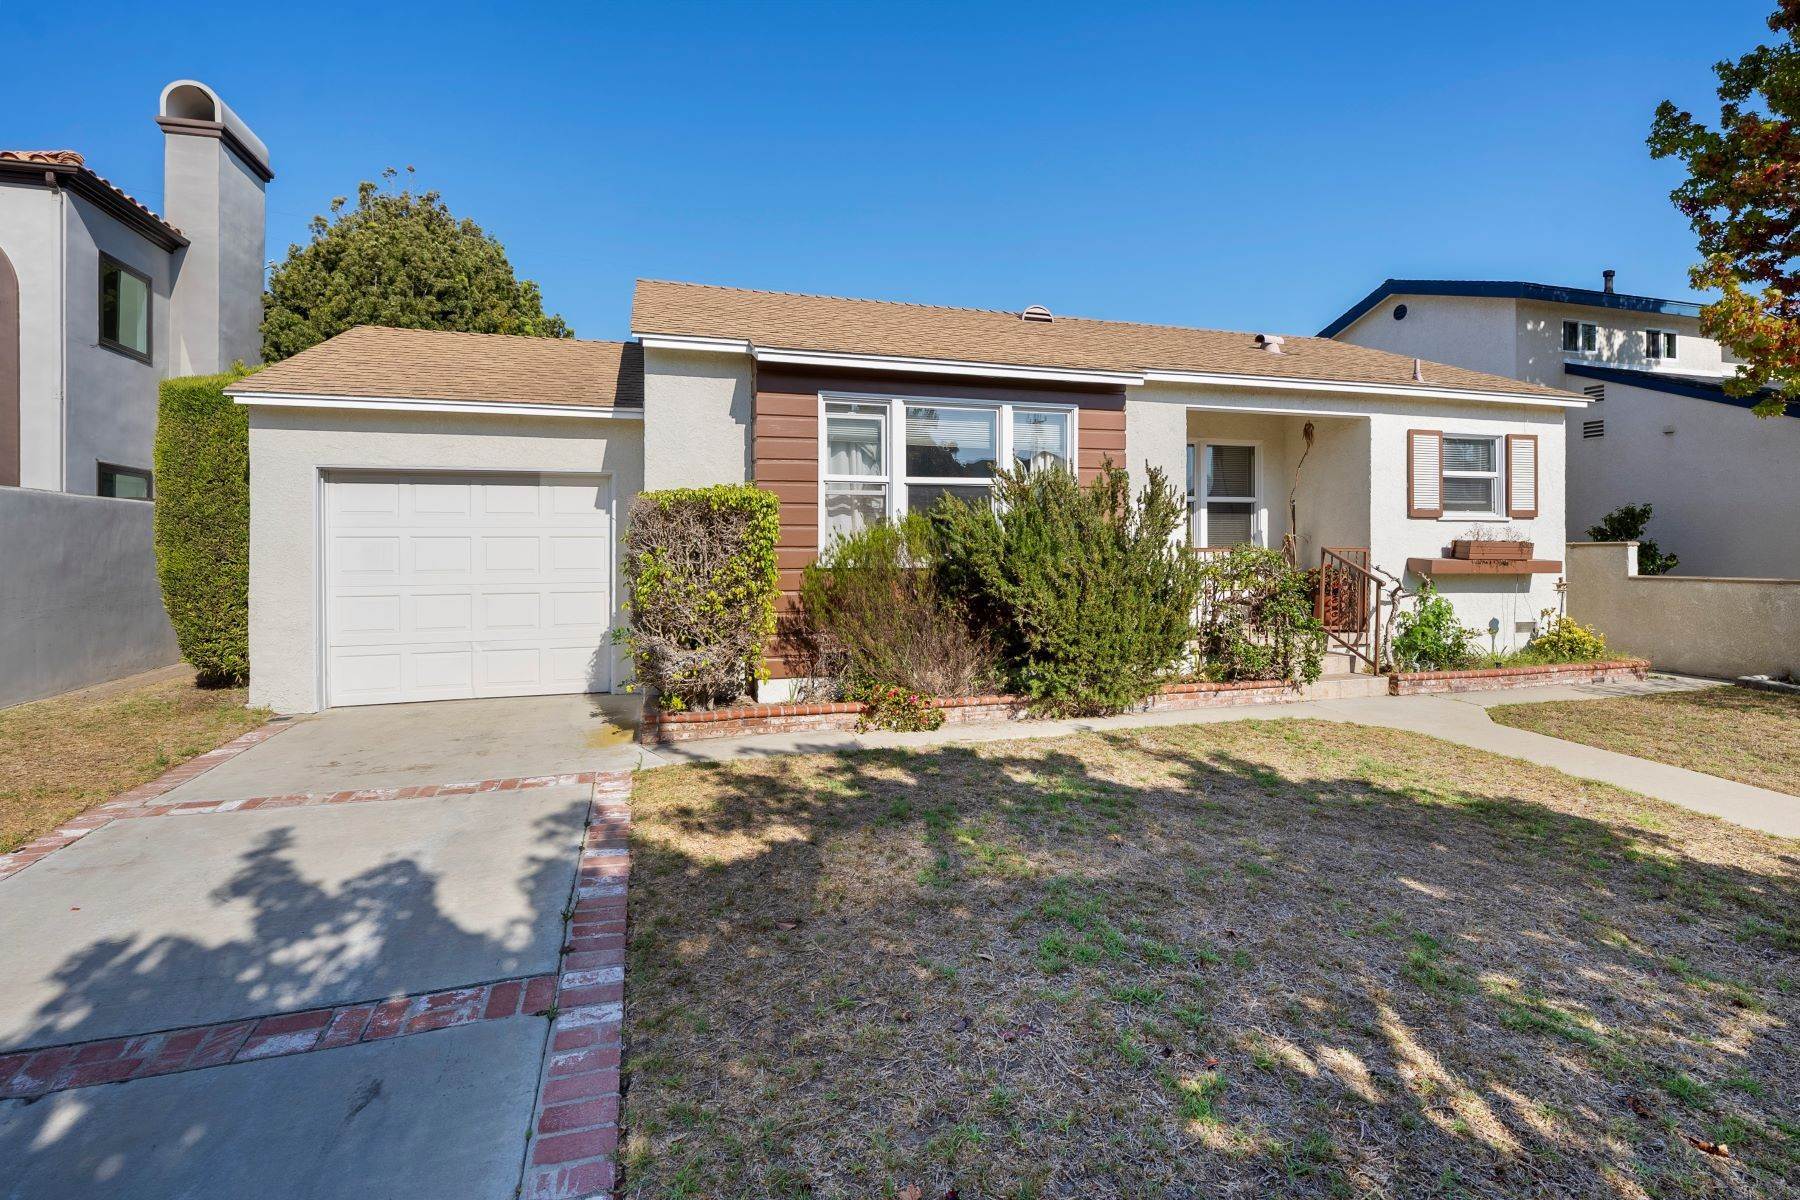 Single Family Homes for Sale at 1612 Harkness Street, Manhattan Beach, CA 90266 1612 Harkness Street Manhattan Beach, California 90266 United States